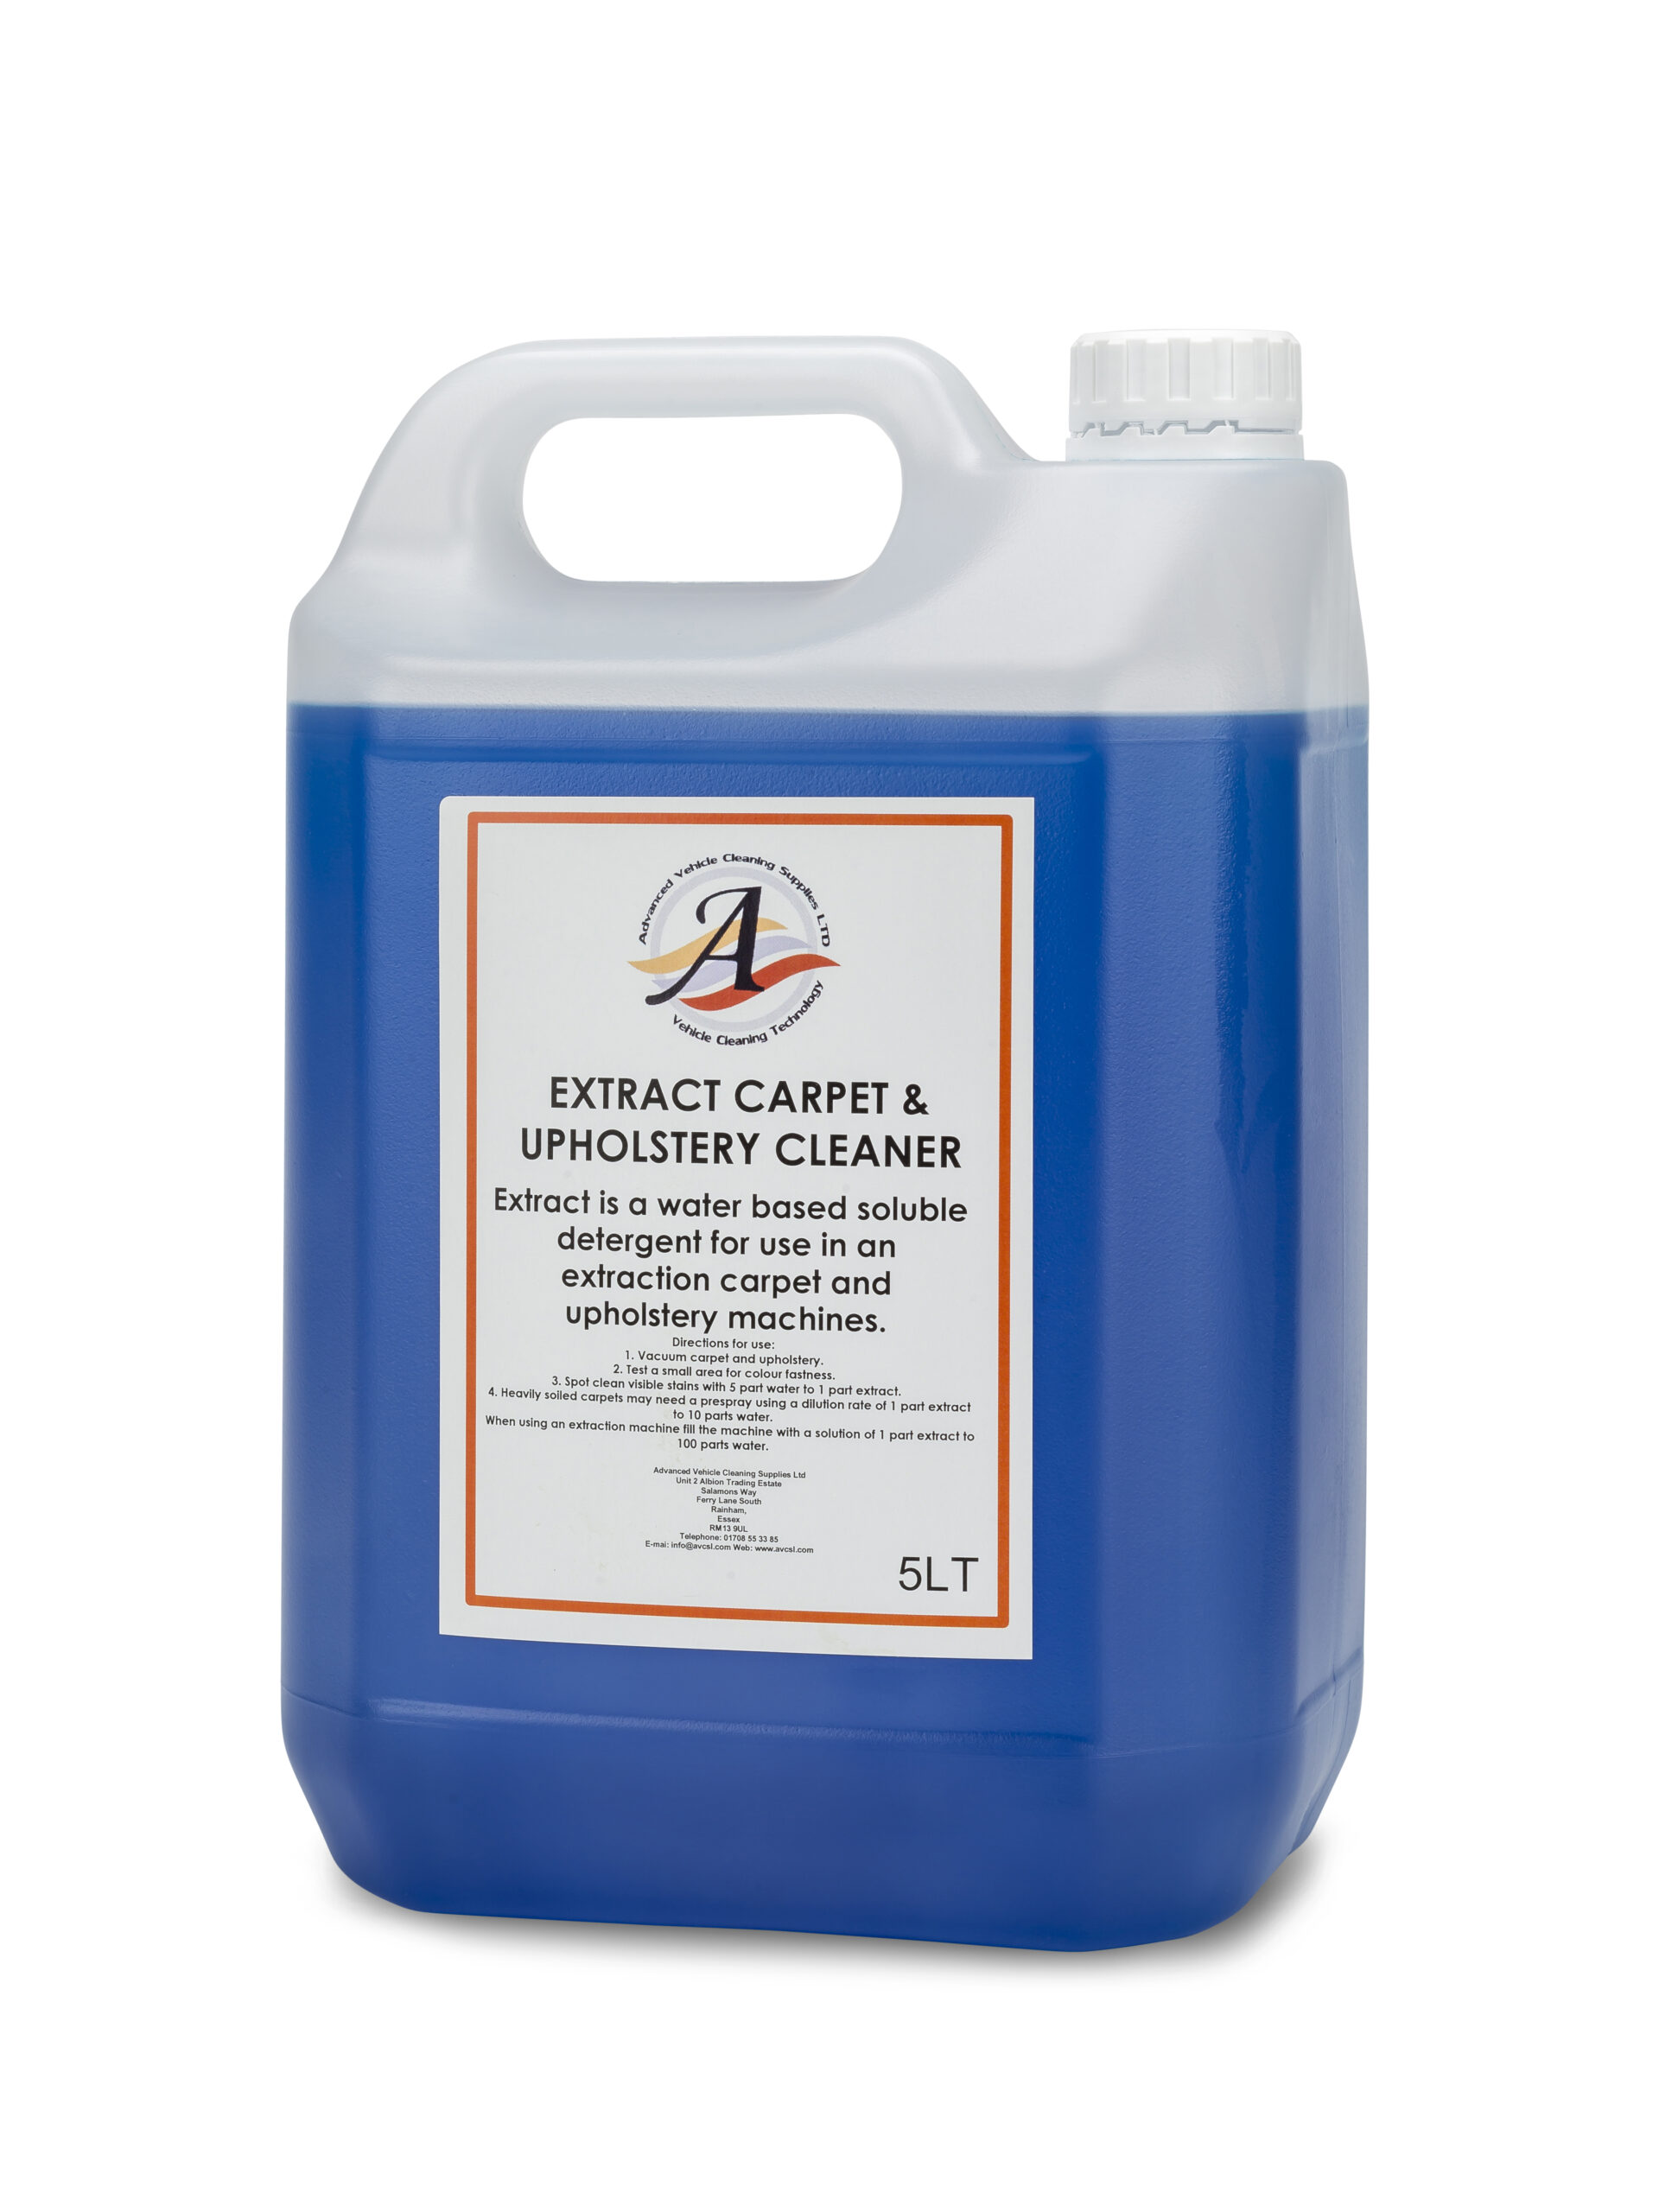 Extract-Carpet-Upholstery-Cleaner